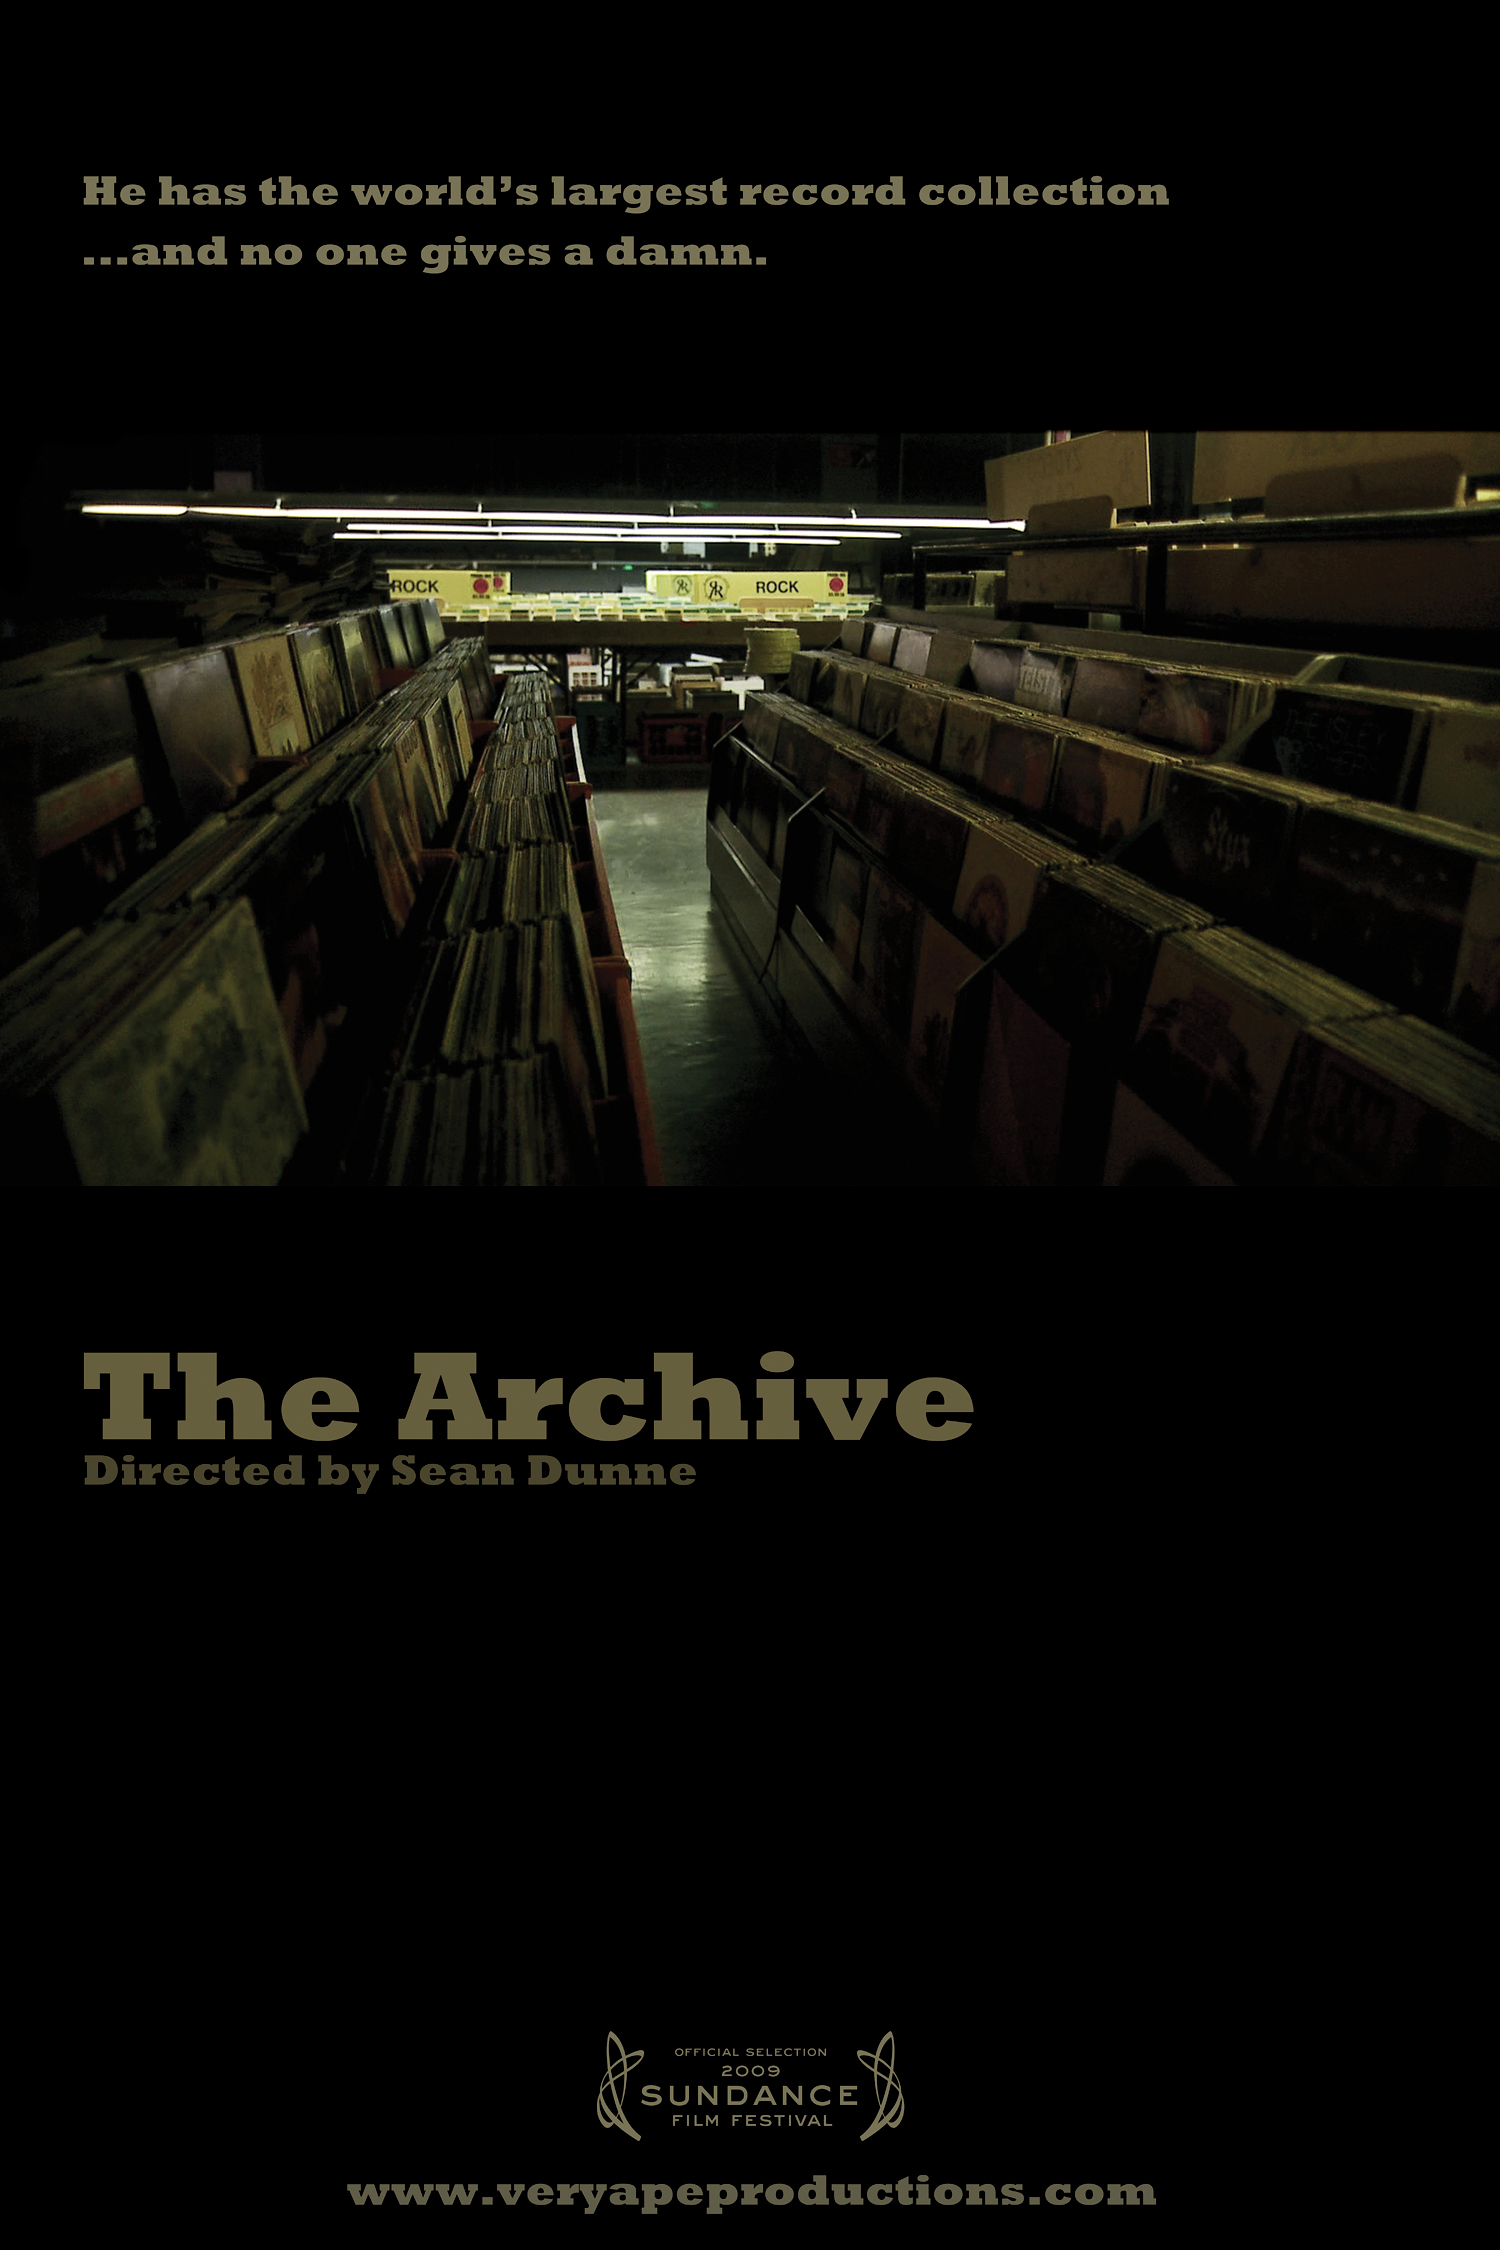 The Archive (2009) Screenshot 4